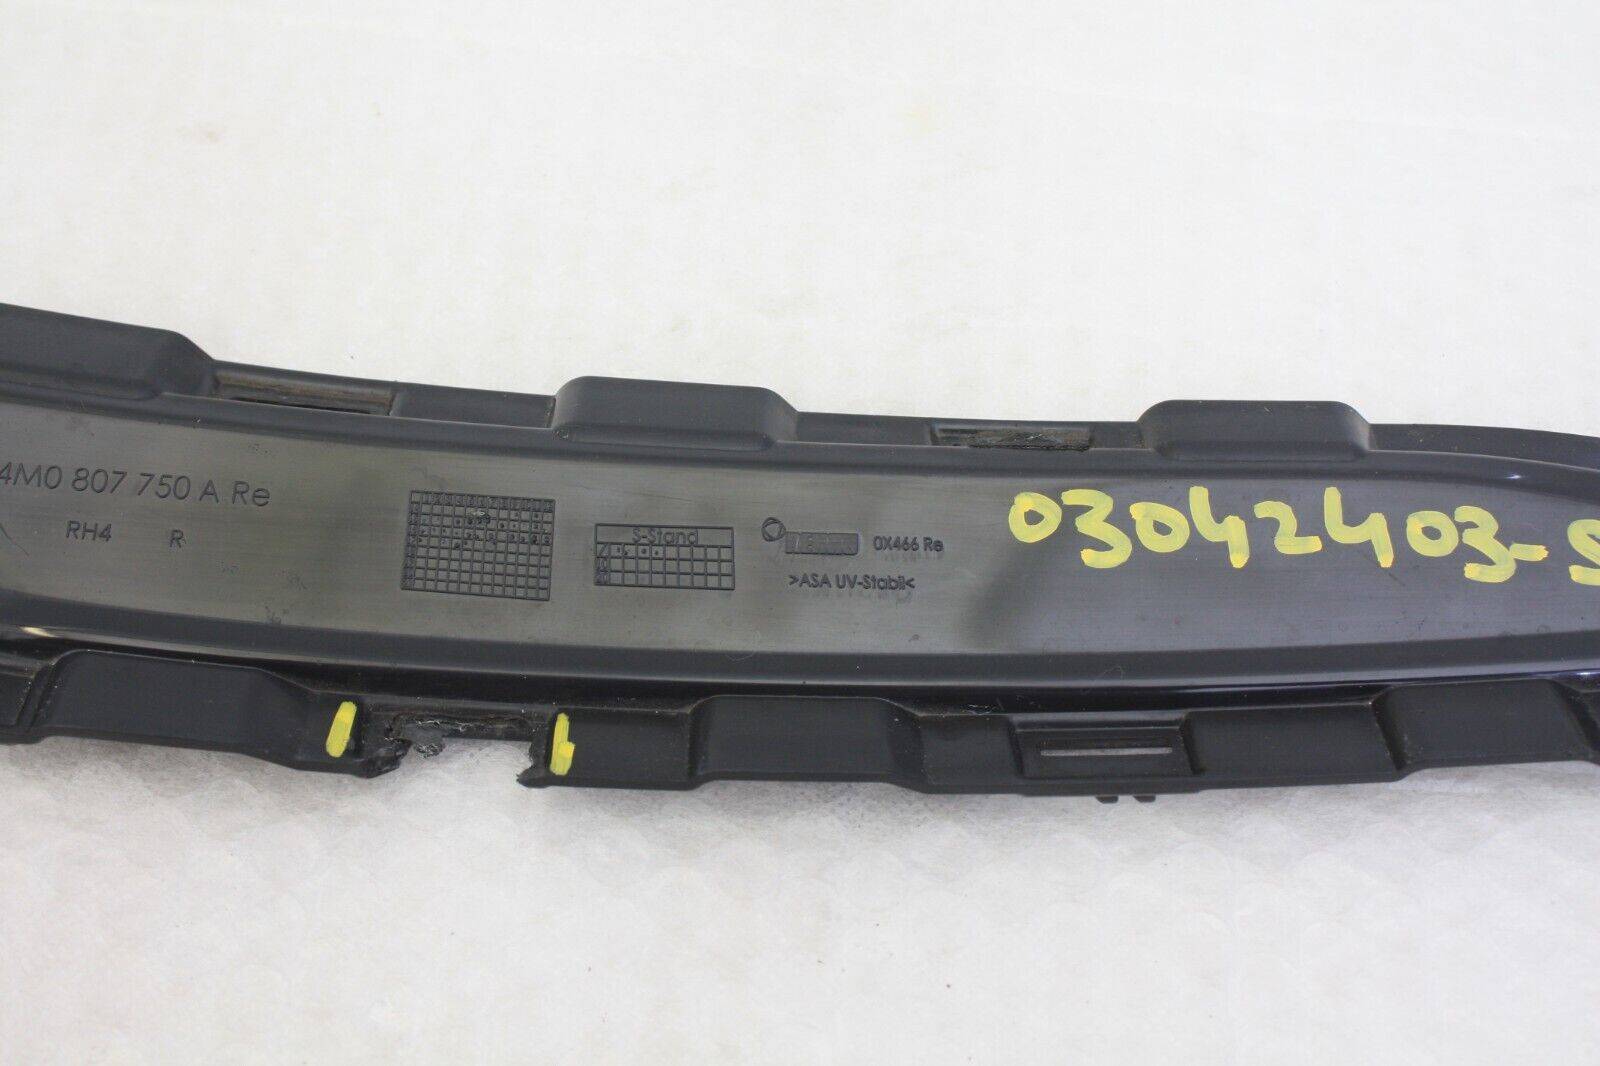 Audi-Q7-Front-Right-End-Cap-Cover-2015-TO-2019-4M0807750A-Genuine-176318342447-11